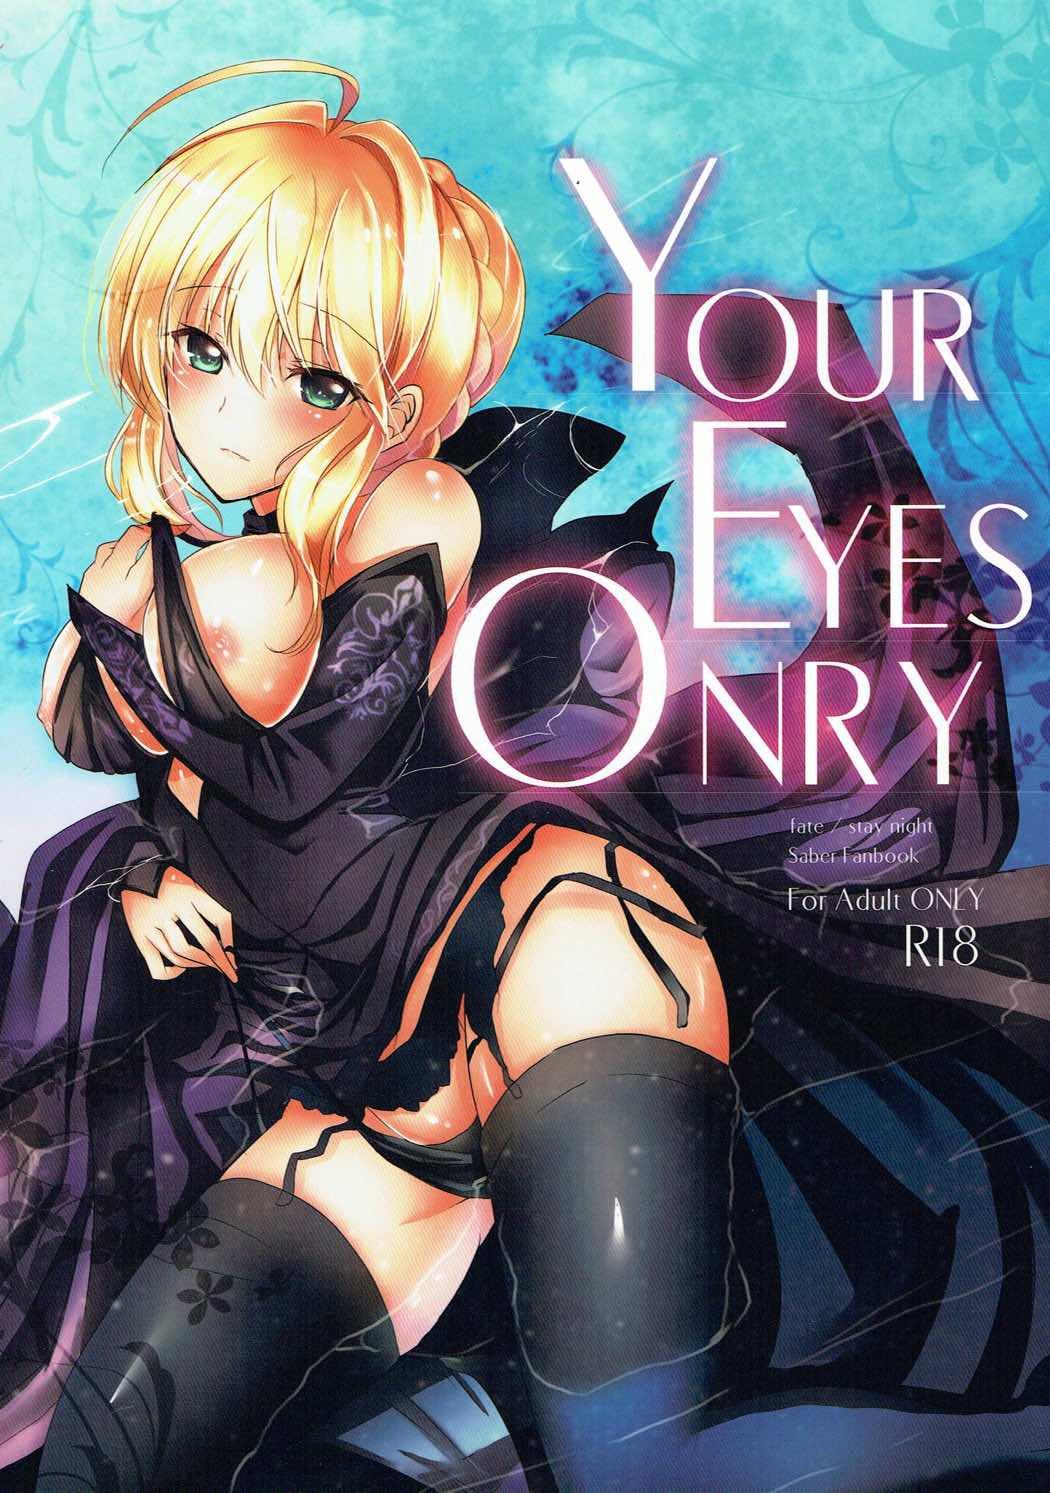 Gonzo YOUR EYES ONRY - Fate stay night Stepdad - Picture 1